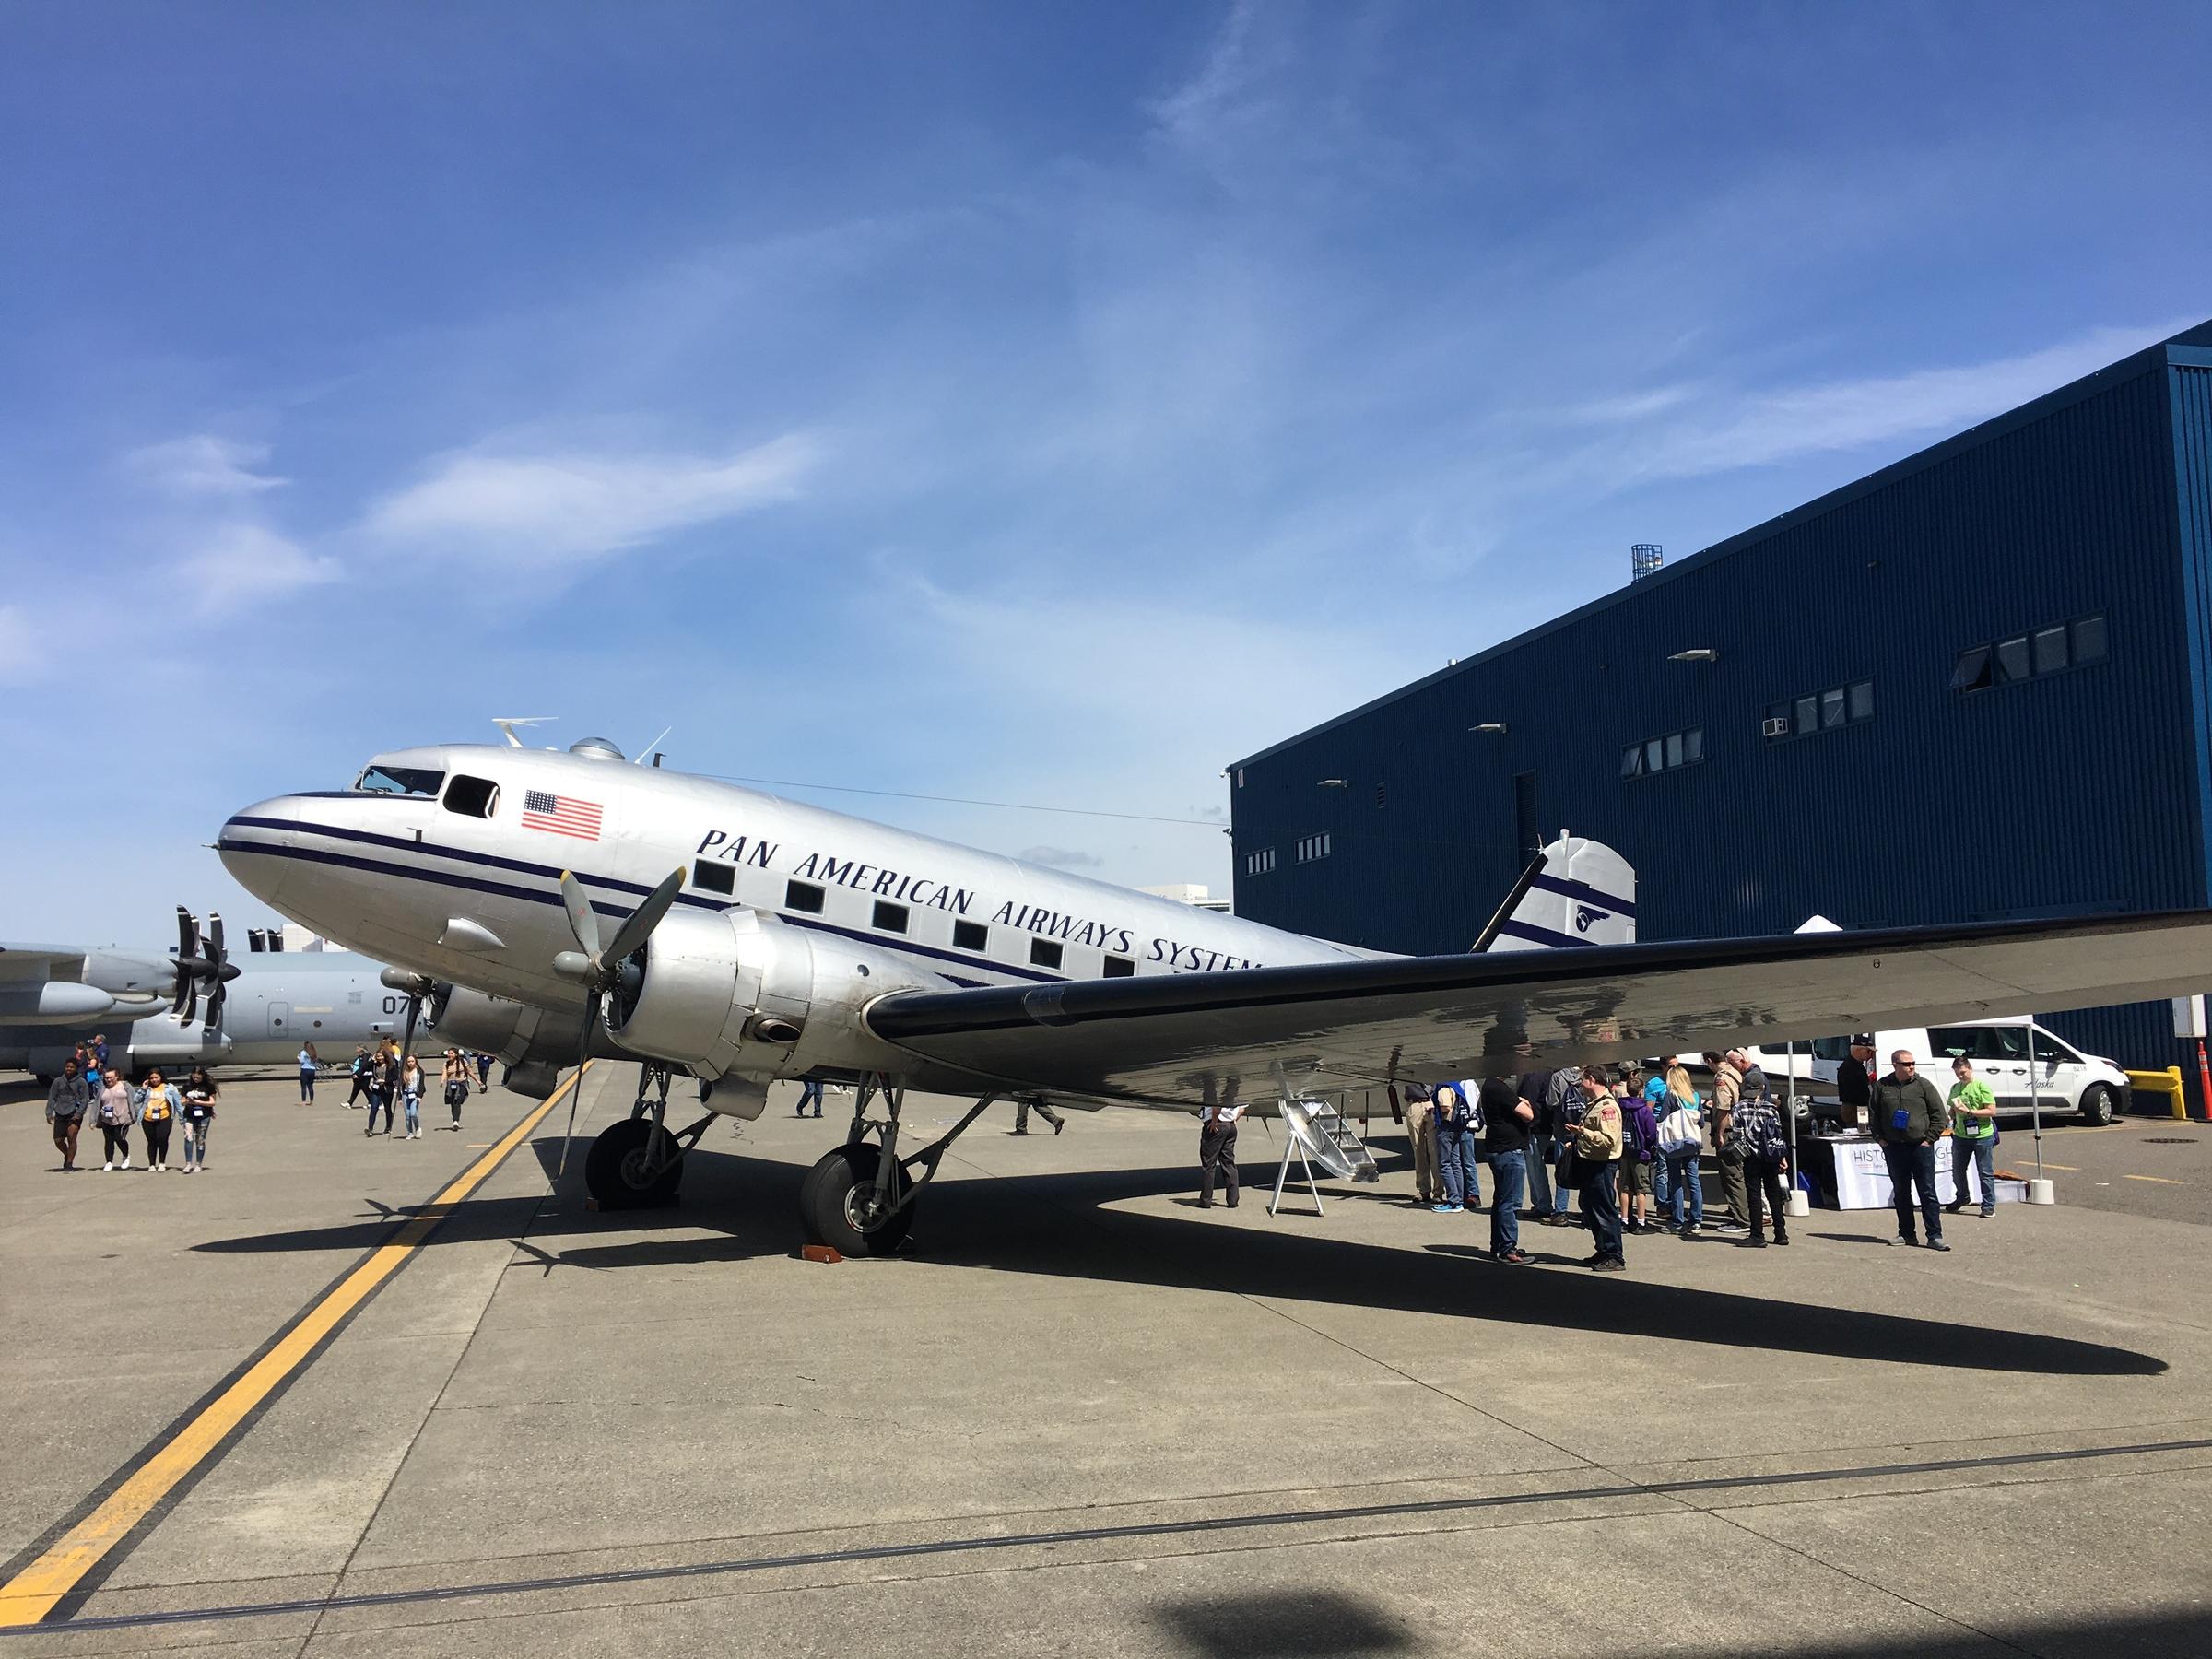 The vintage DC-3 owned by Historic Flight Foundation was on display at Sea-Tac Airport in early May before commencing its long trip to Europe. CREDIT: TOM BANSE / NW NEWS NETWORK